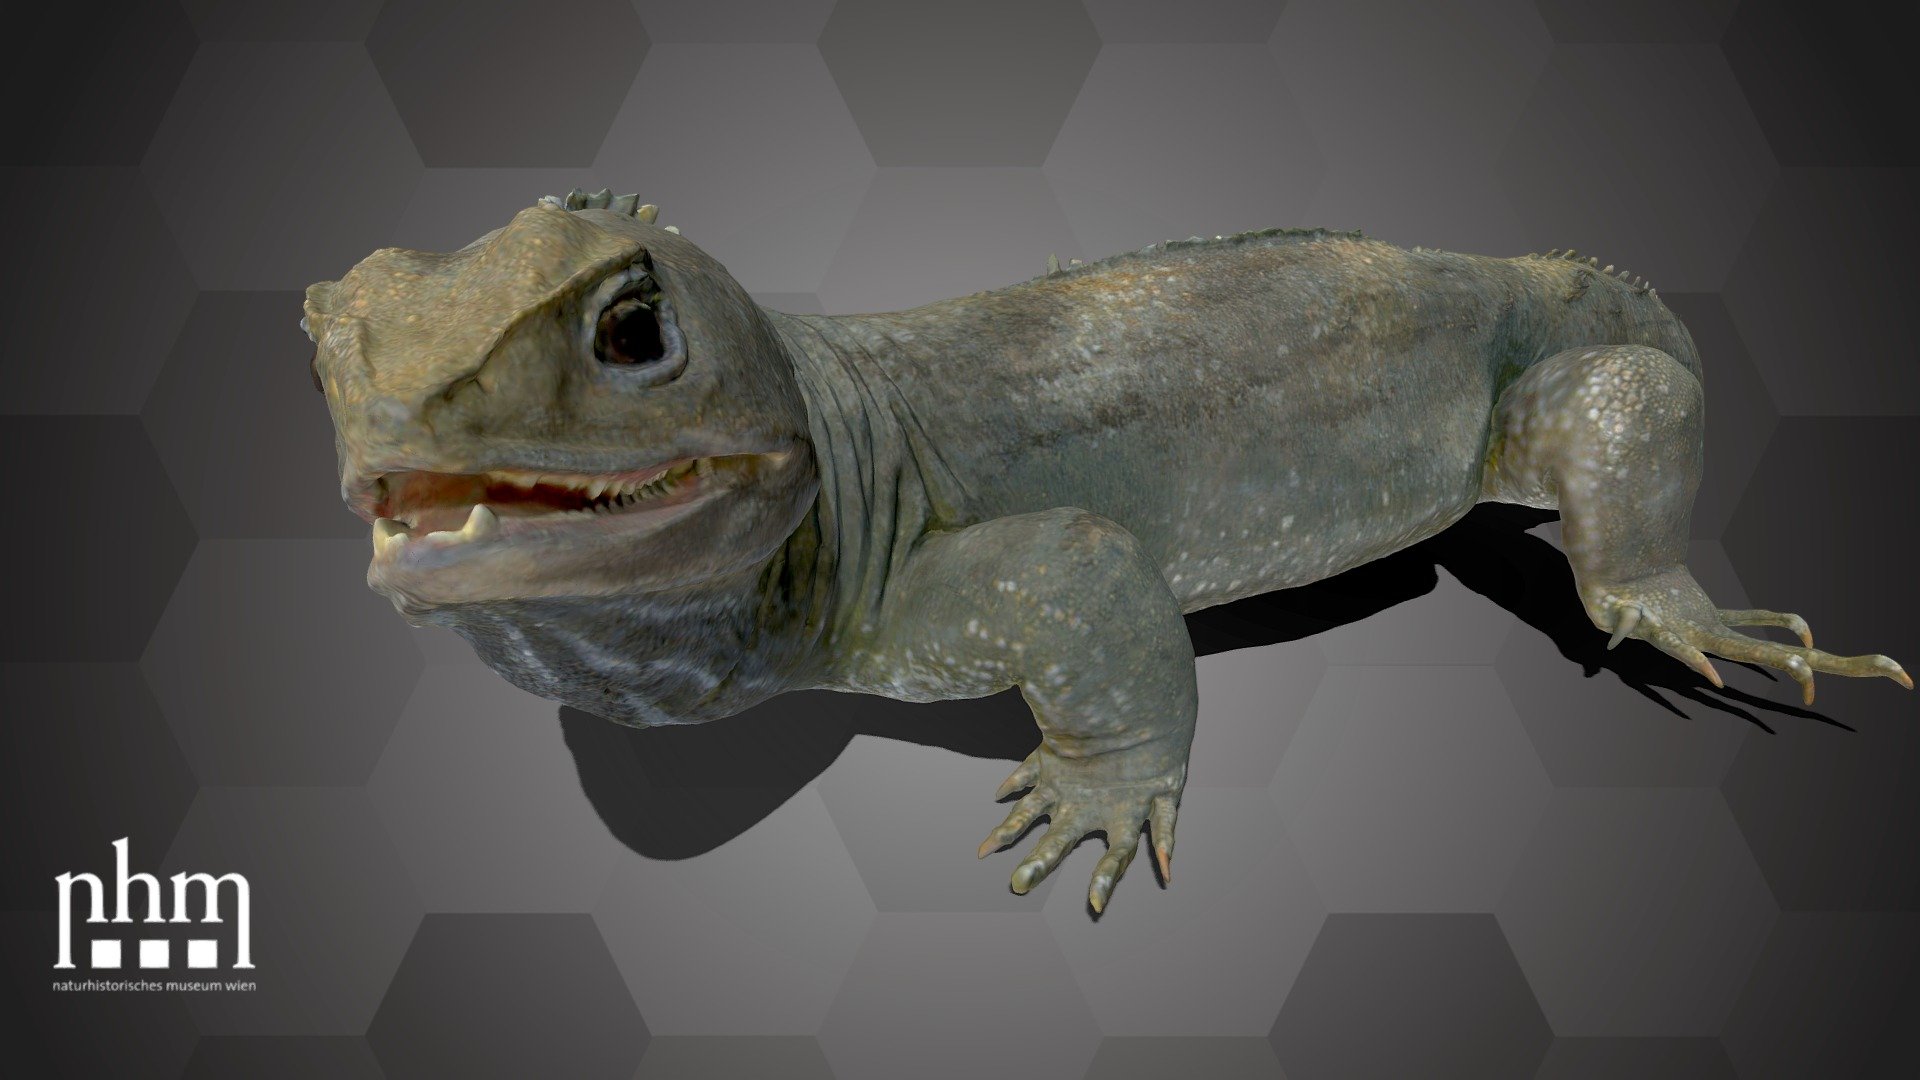 3D scan of a tuatara (Sphenodon punctatus), a lizard that lives on small islands off the coast of New Zealand. The tuatara has a strong, stocky body. The neck, back and tail bear a crest of long scales. The animals reach a total length of 65 to 75 cm and are crepuscular and nocturnal.

This specimen is Number 68 of the NHM Top 100 and can be found in Hall 27 of the Natural History Museum Vienna.

Specimen: Sphenodon punctatus (Gray, 1842)

Inventory number: NHMW-Zoo1-HS  32311

Collection: Natural History Museum Vienna, 1st Zoological Dept., Herpetology Coll. (curator: Silke Schweiger) 

Find out more about the NHM Vienna here.

Scanned and edited by Anna Haider (NHMW)

Scanner: Artec Space Spider. Infrastructure funded by the FFG 3d model